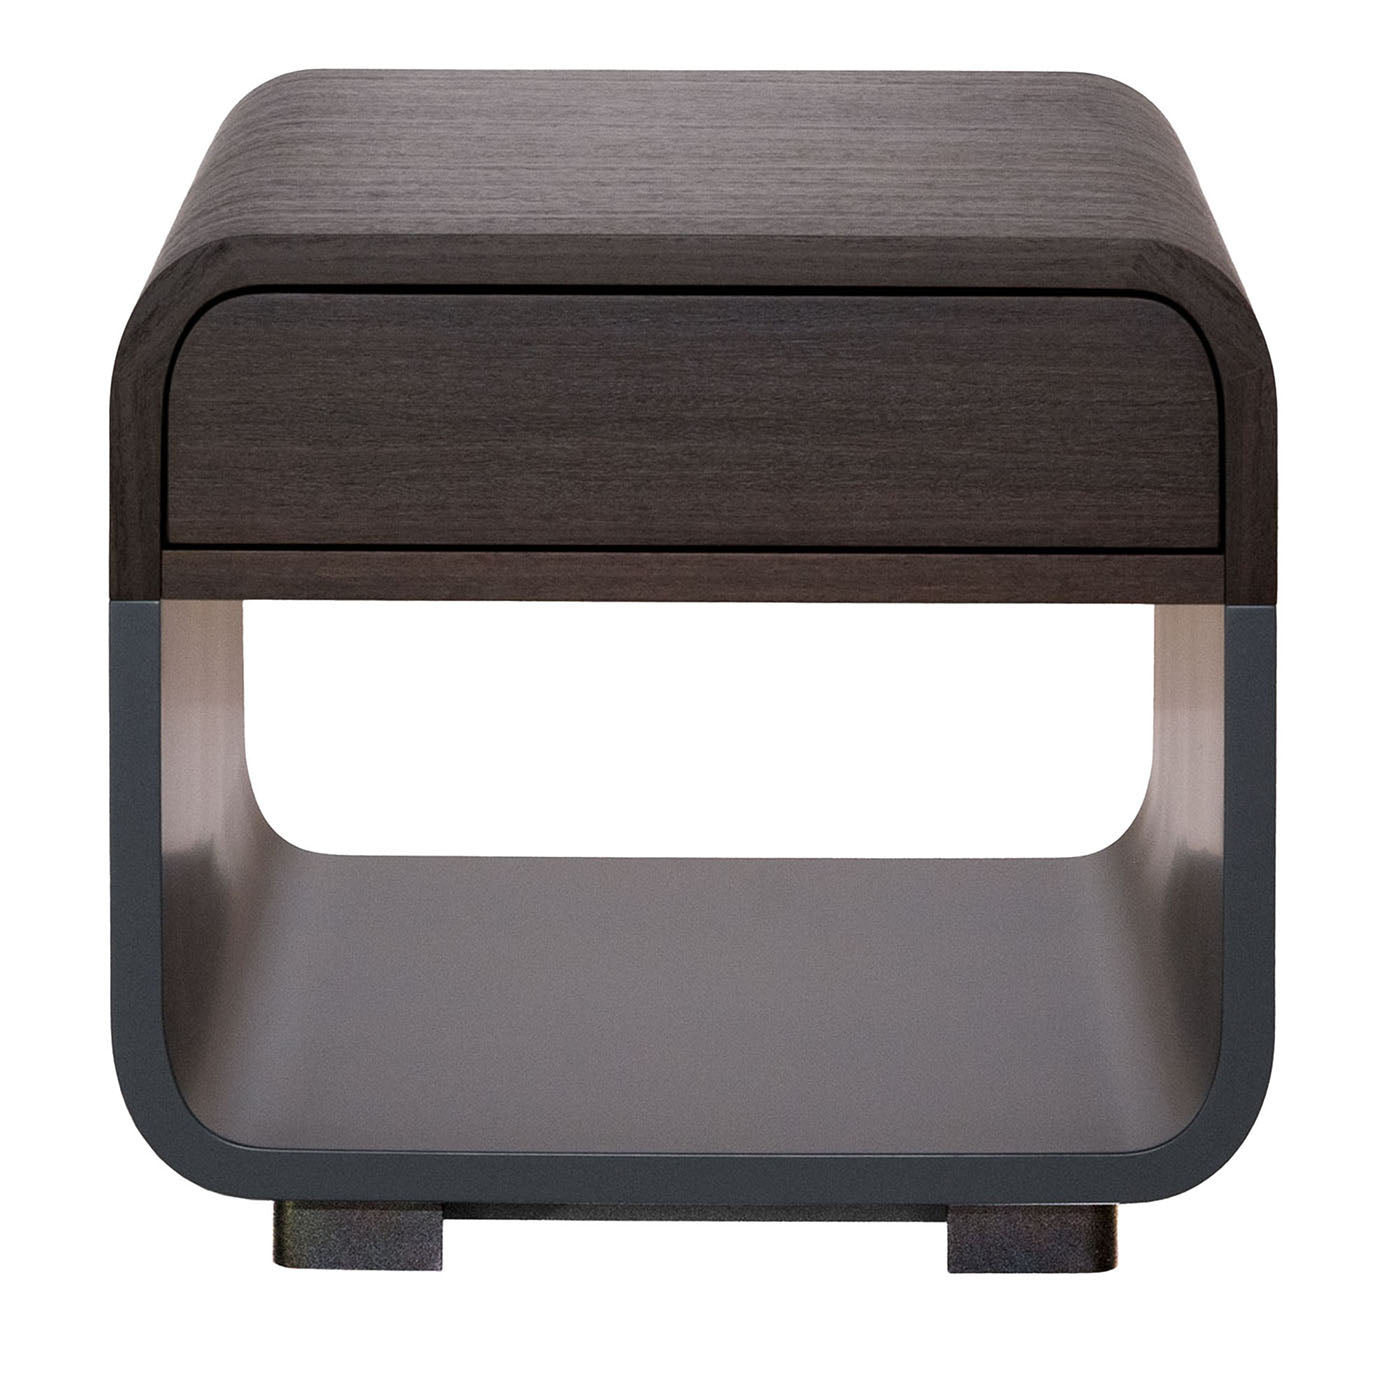 Tabaco Brown Nightstand  - Main view